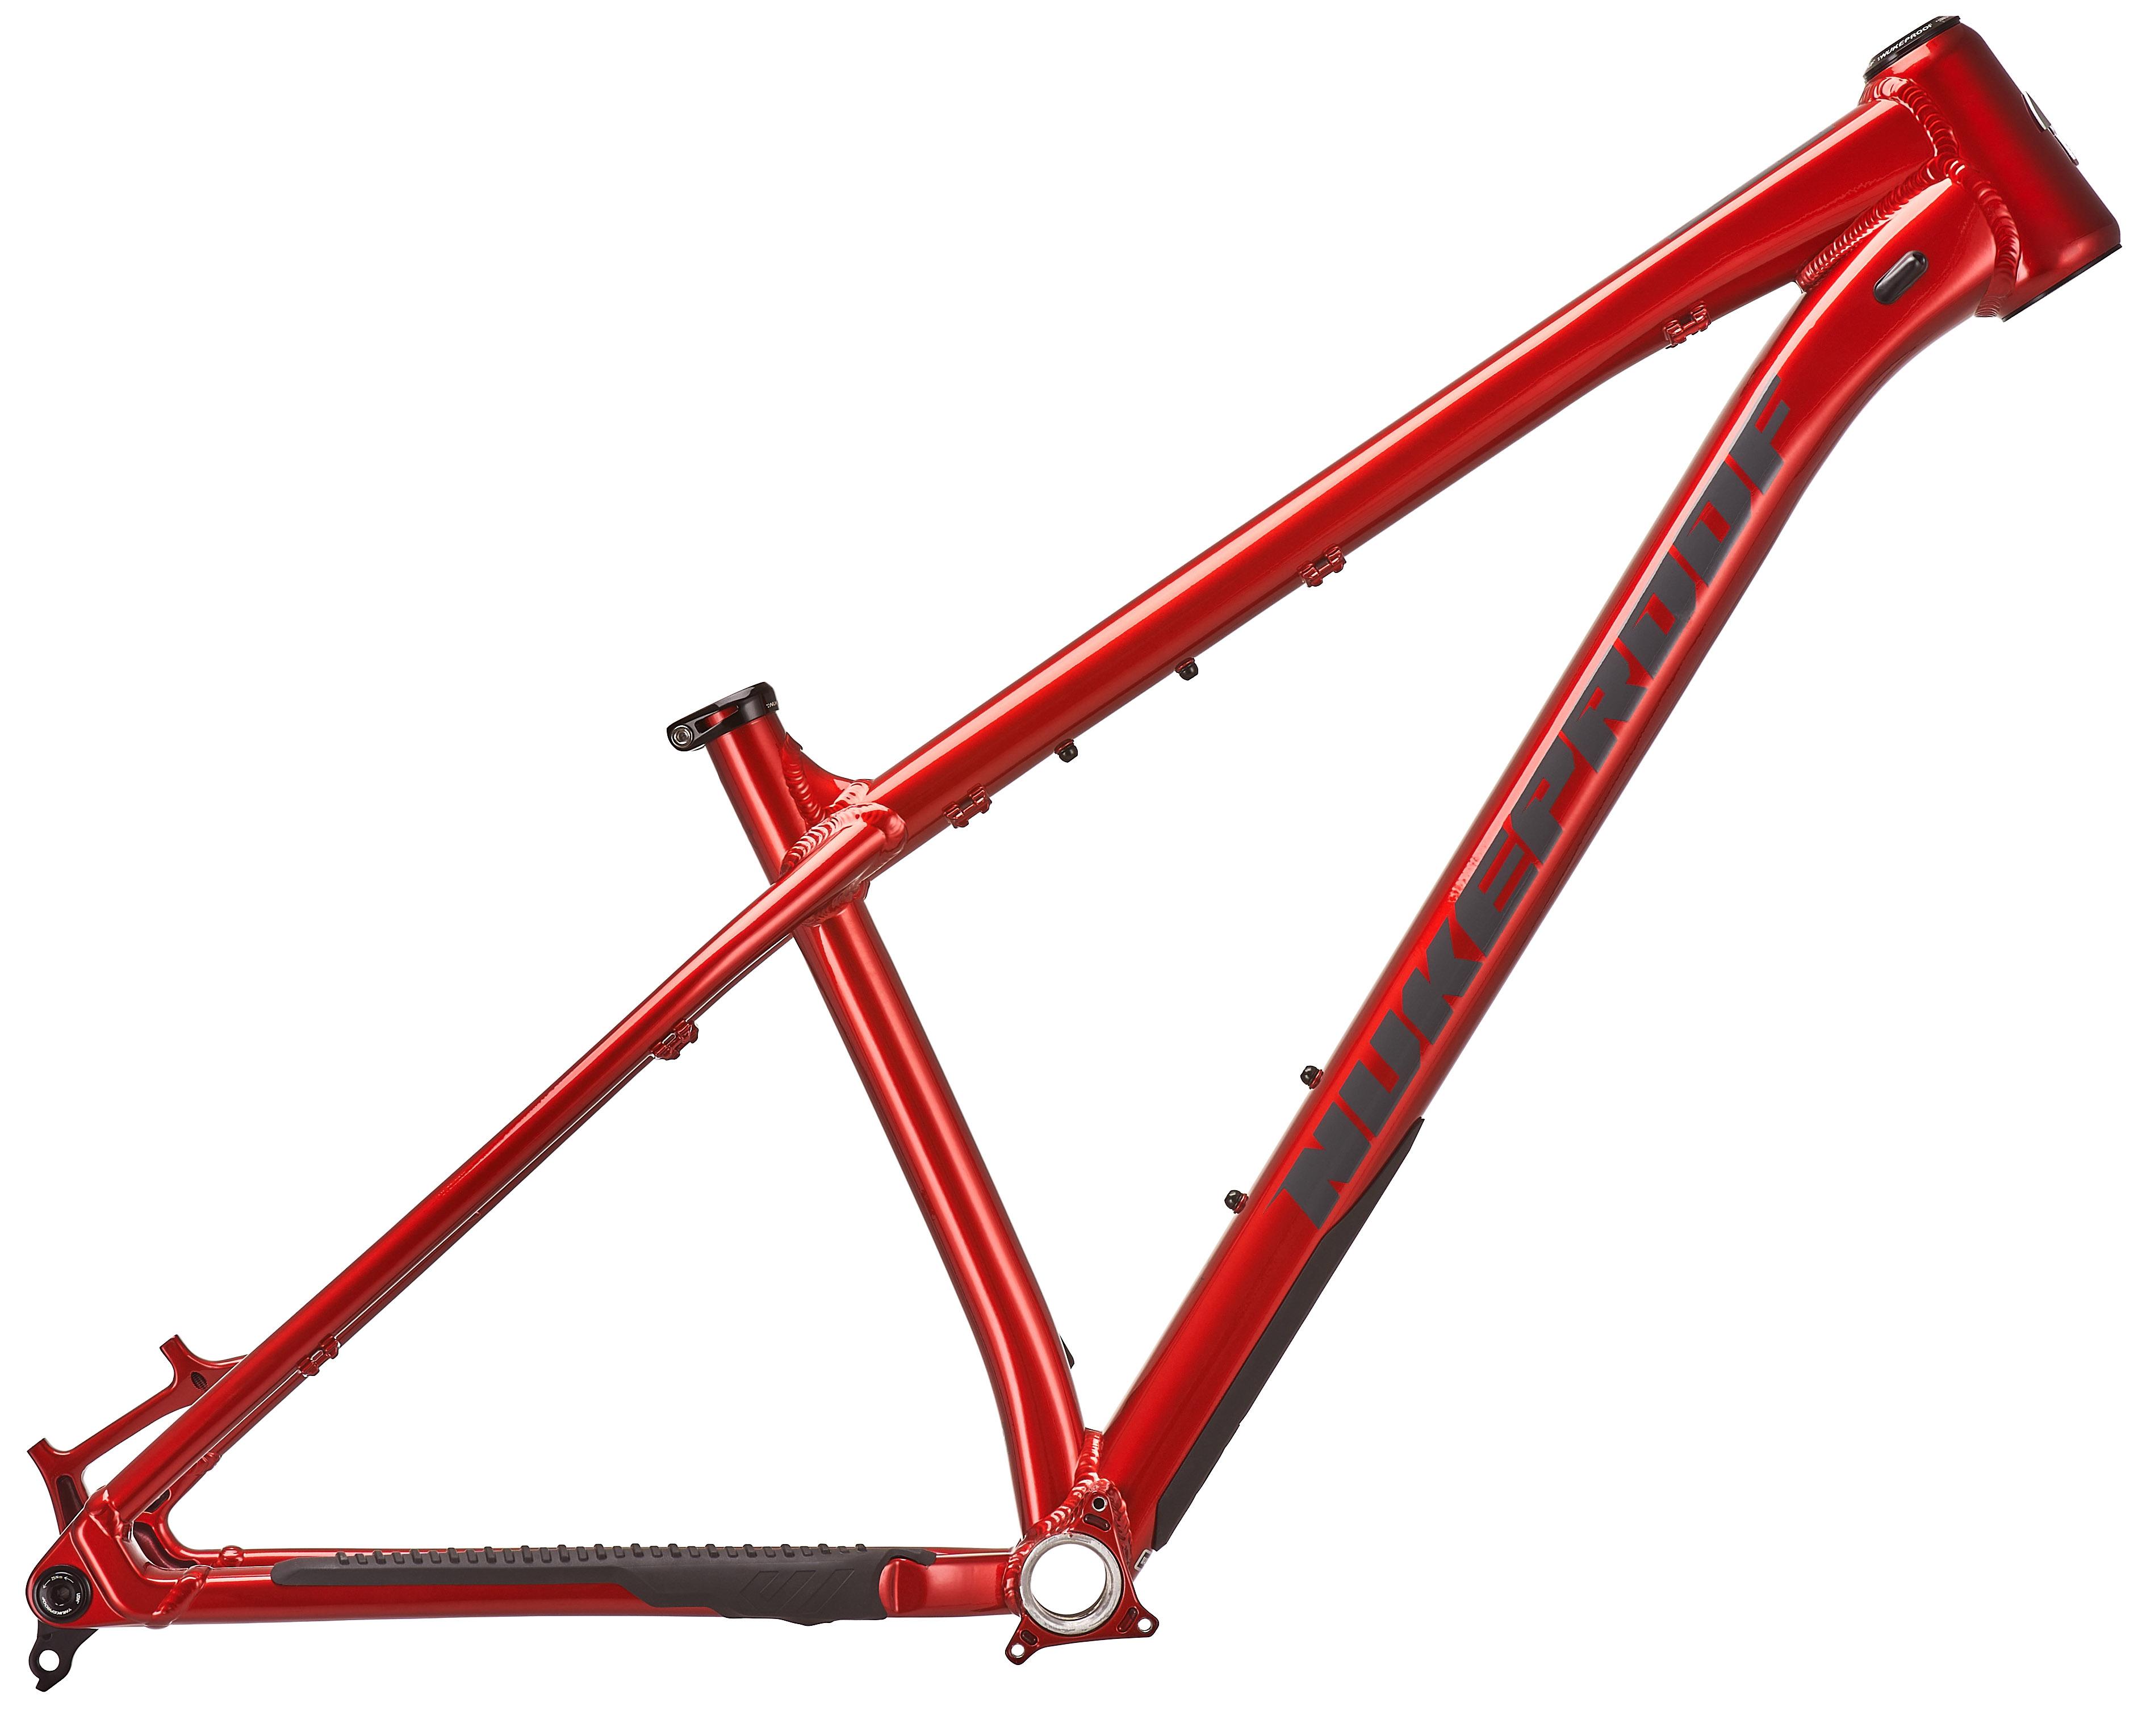 Nukeproof Scout 275 Alloy Mountain Bike Frame - Racing Red